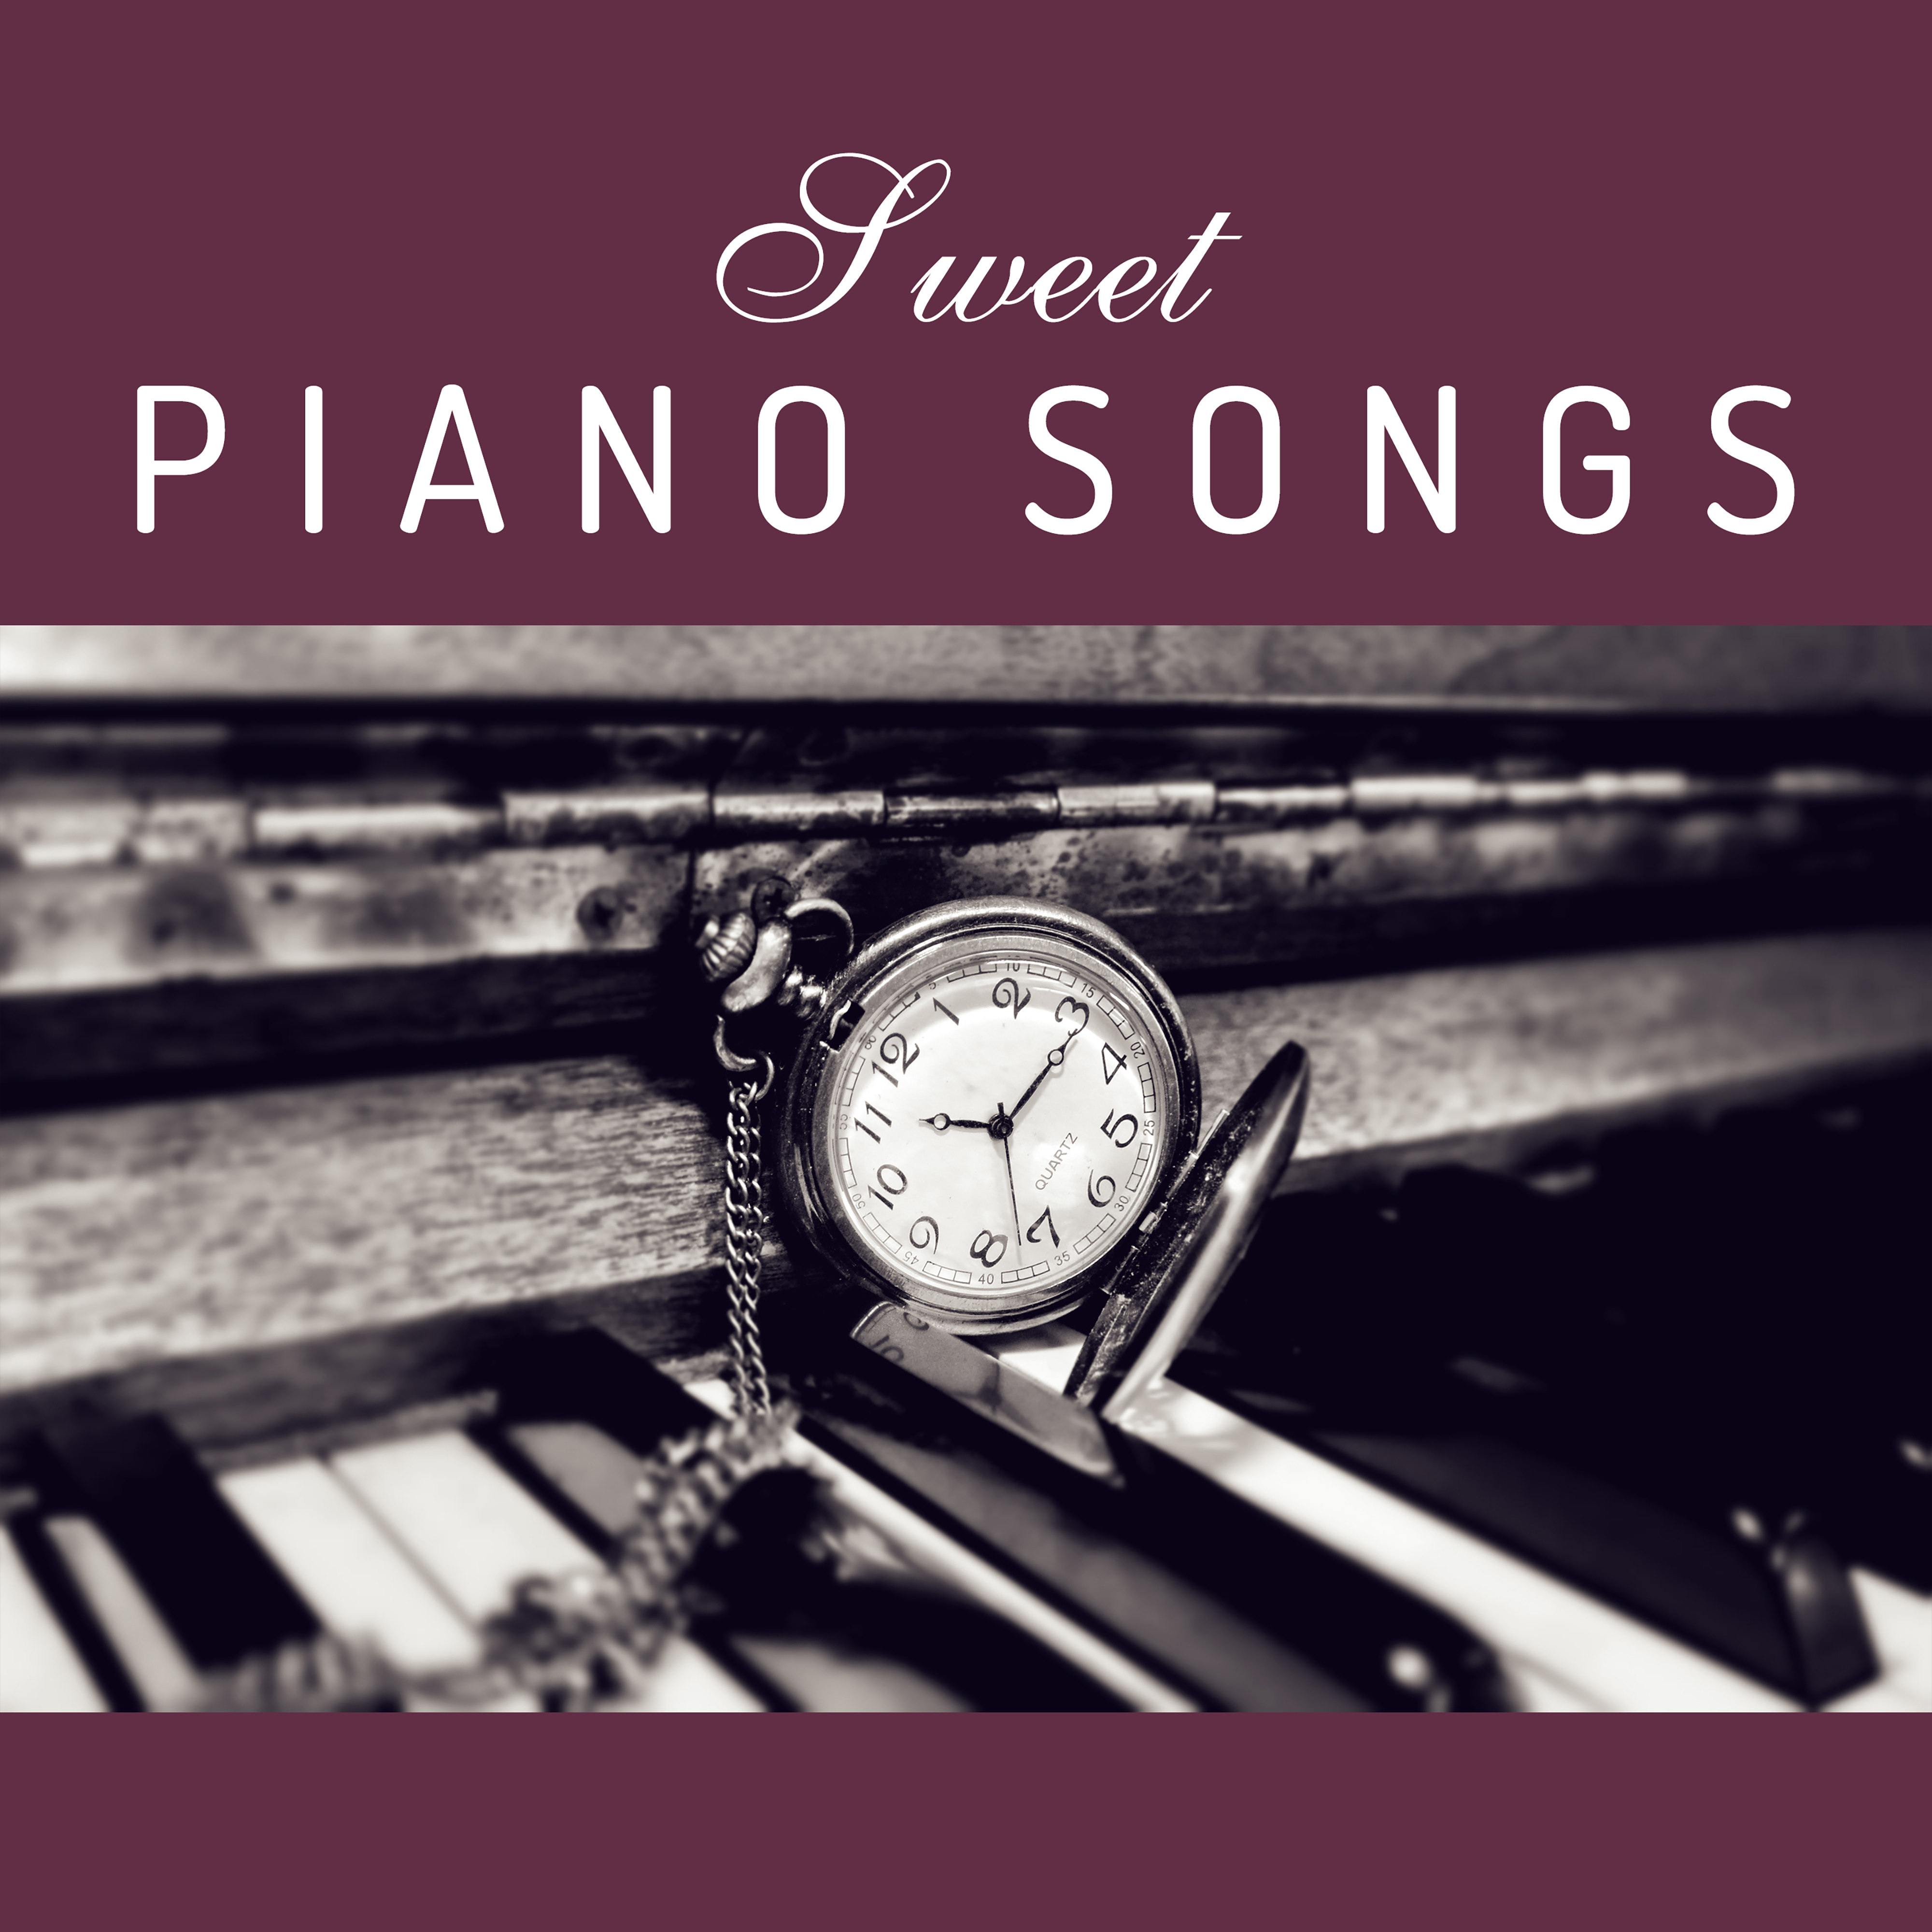 Sweet Piano Songs – Soothing Sounds of Jazz Instrumental, Mellow Jazz, Relaxed Jazz